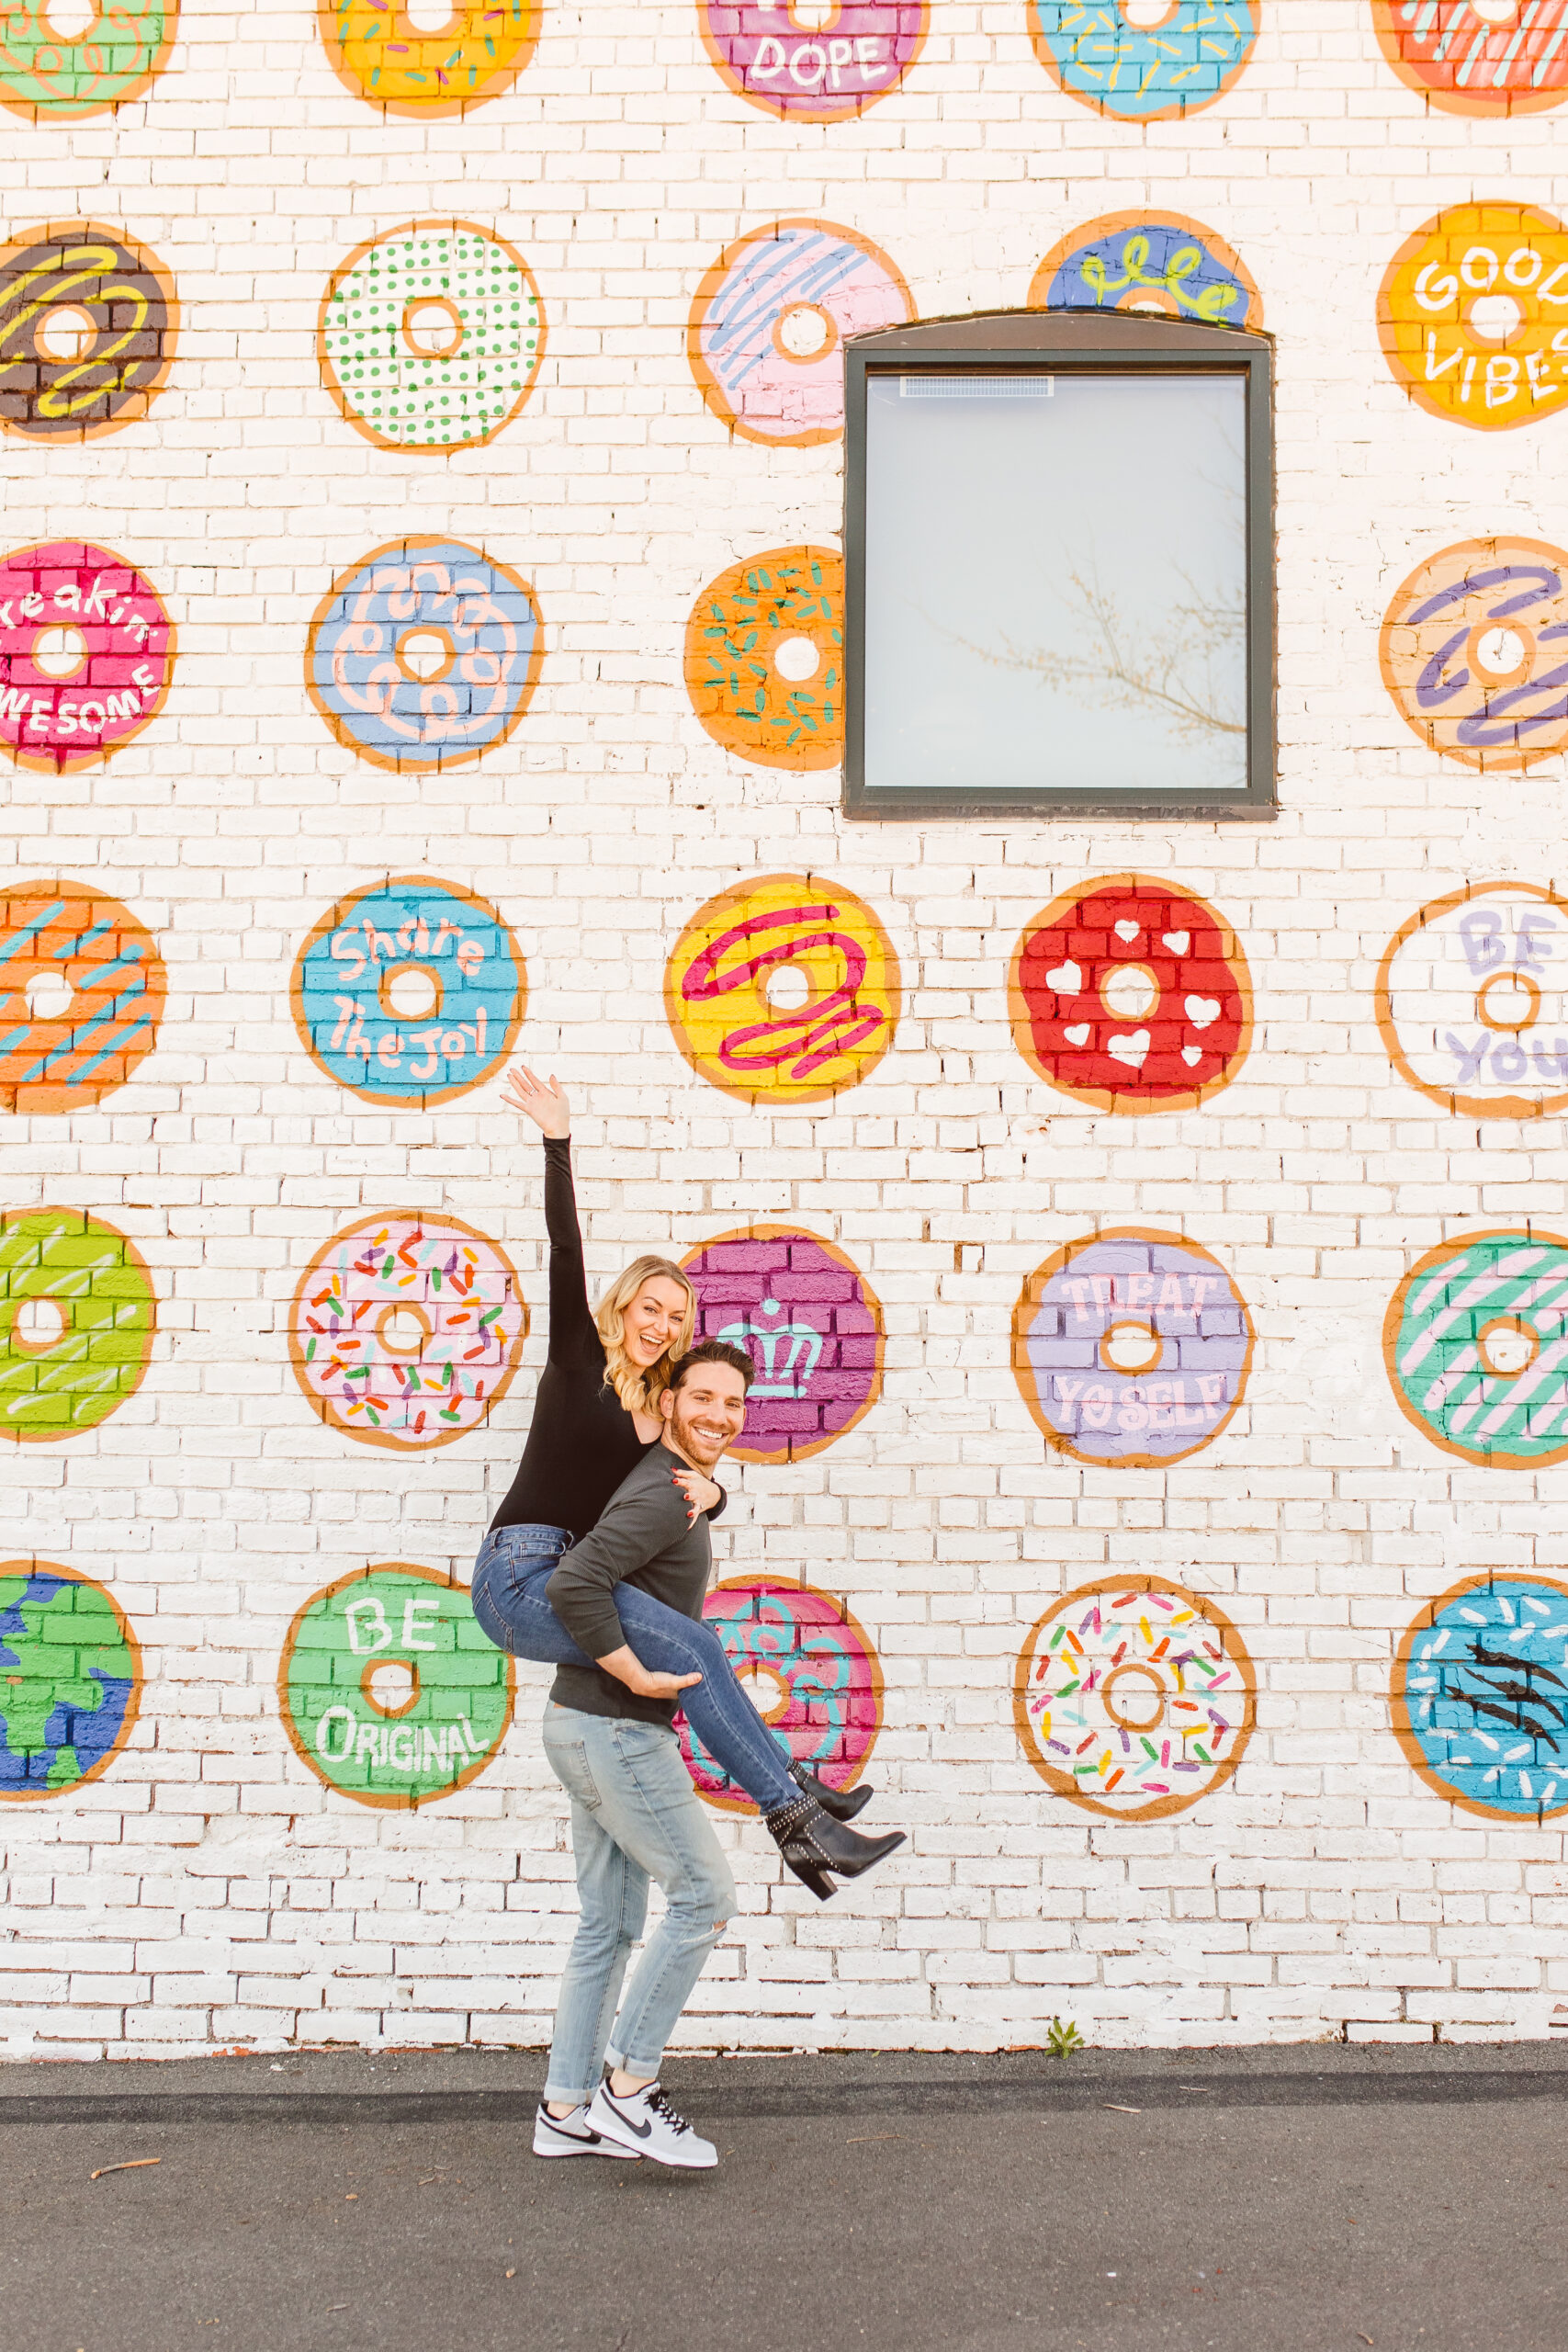 Dre Charlotte Influencer posing in front of Donut Wall 6. Donut Wall by Gina Elizabeth Franco at 2116 Hawkins St - Best Murals in Charlotte North Carolina